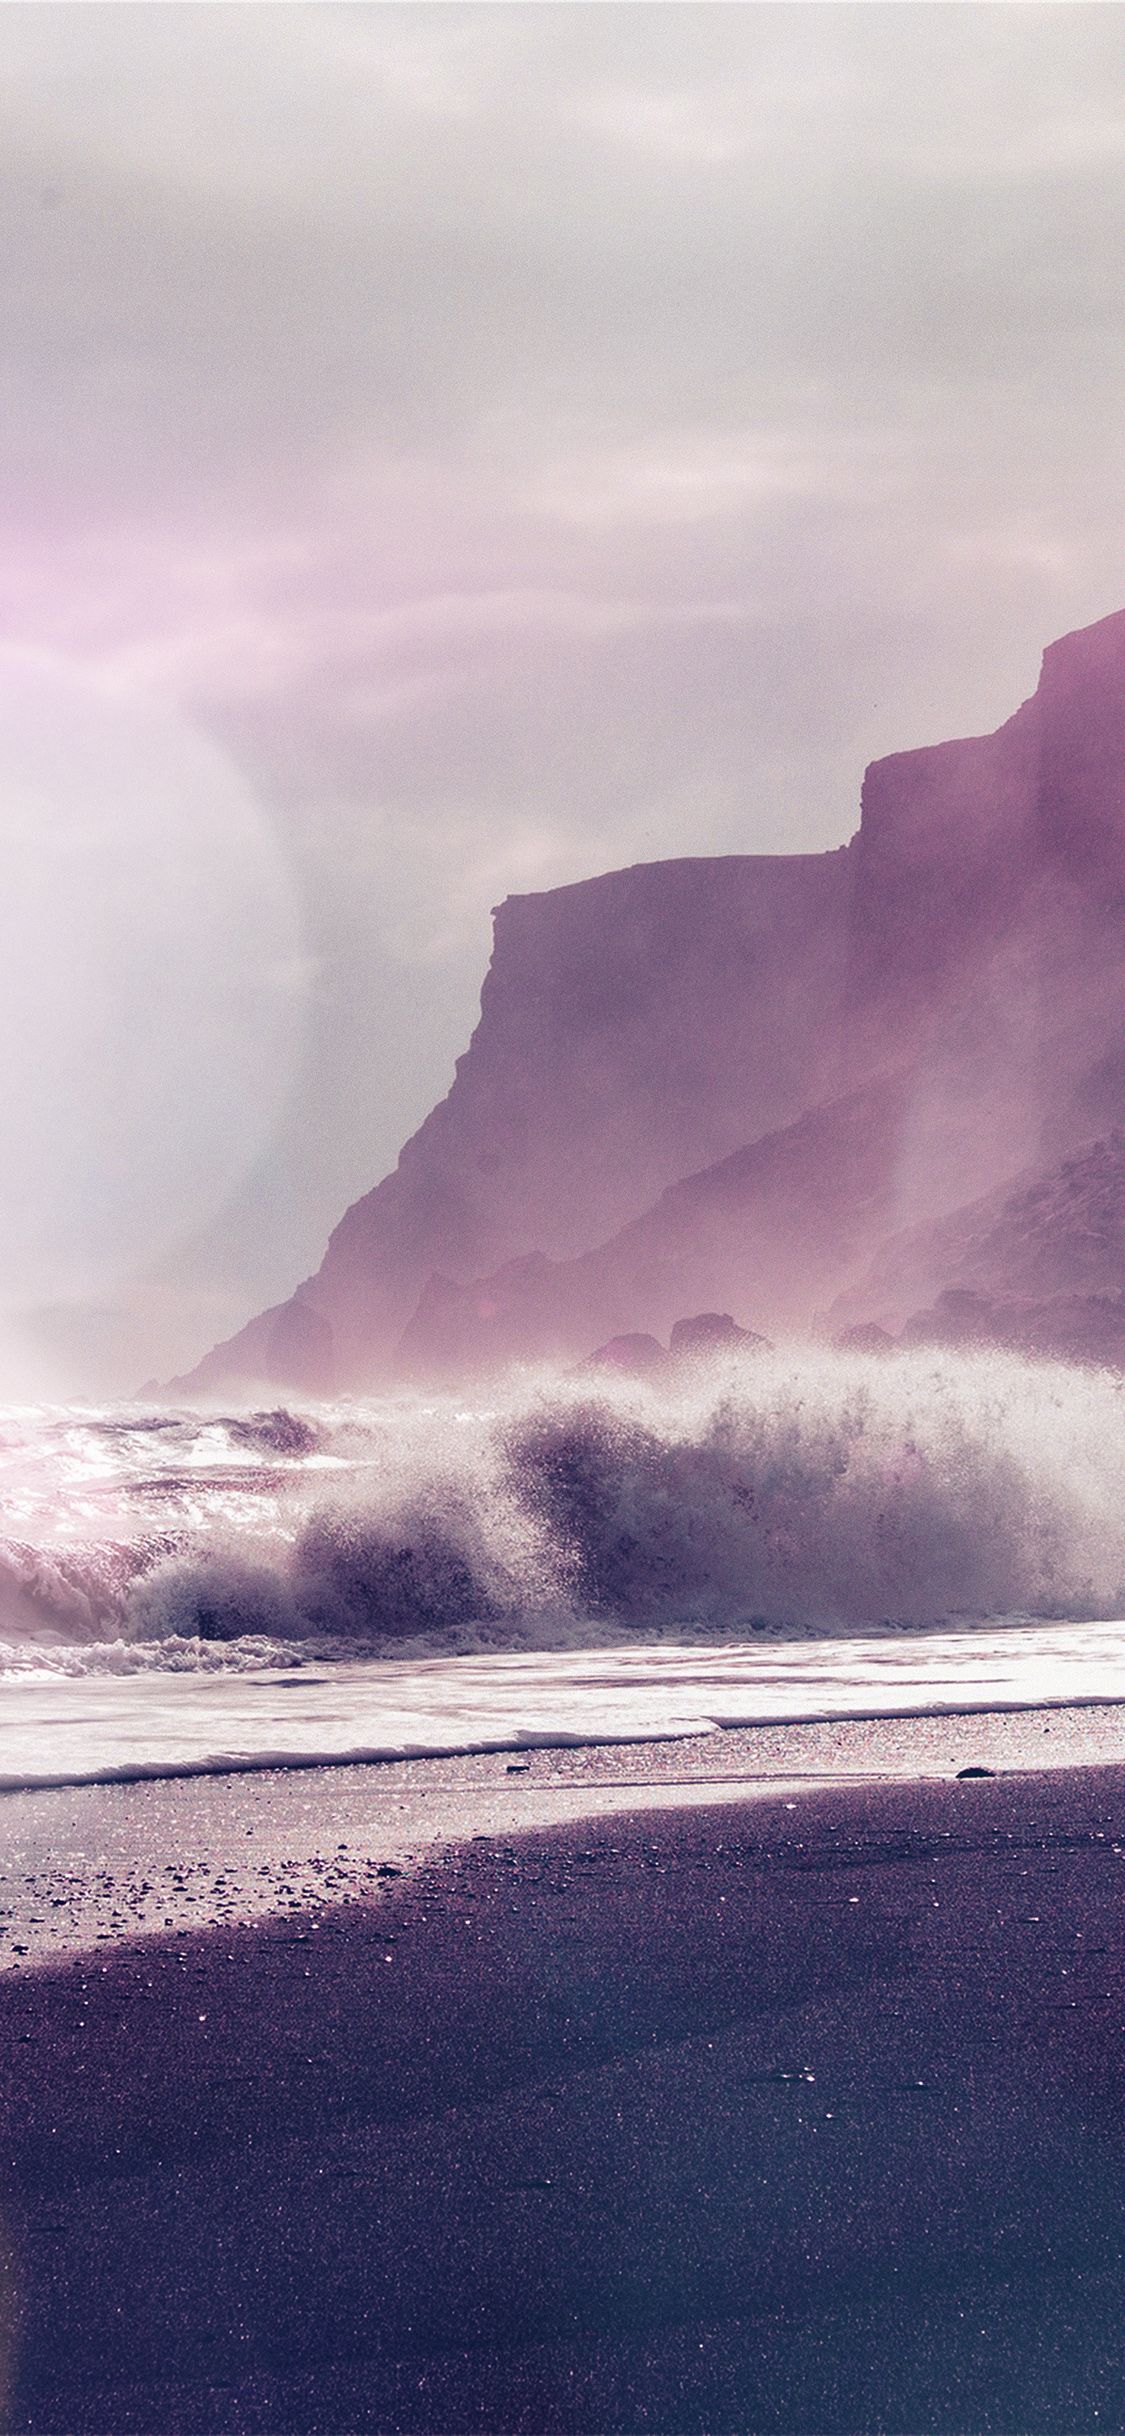 IPhone wallpaper of a cliff with waves crashing on the beach - Beach